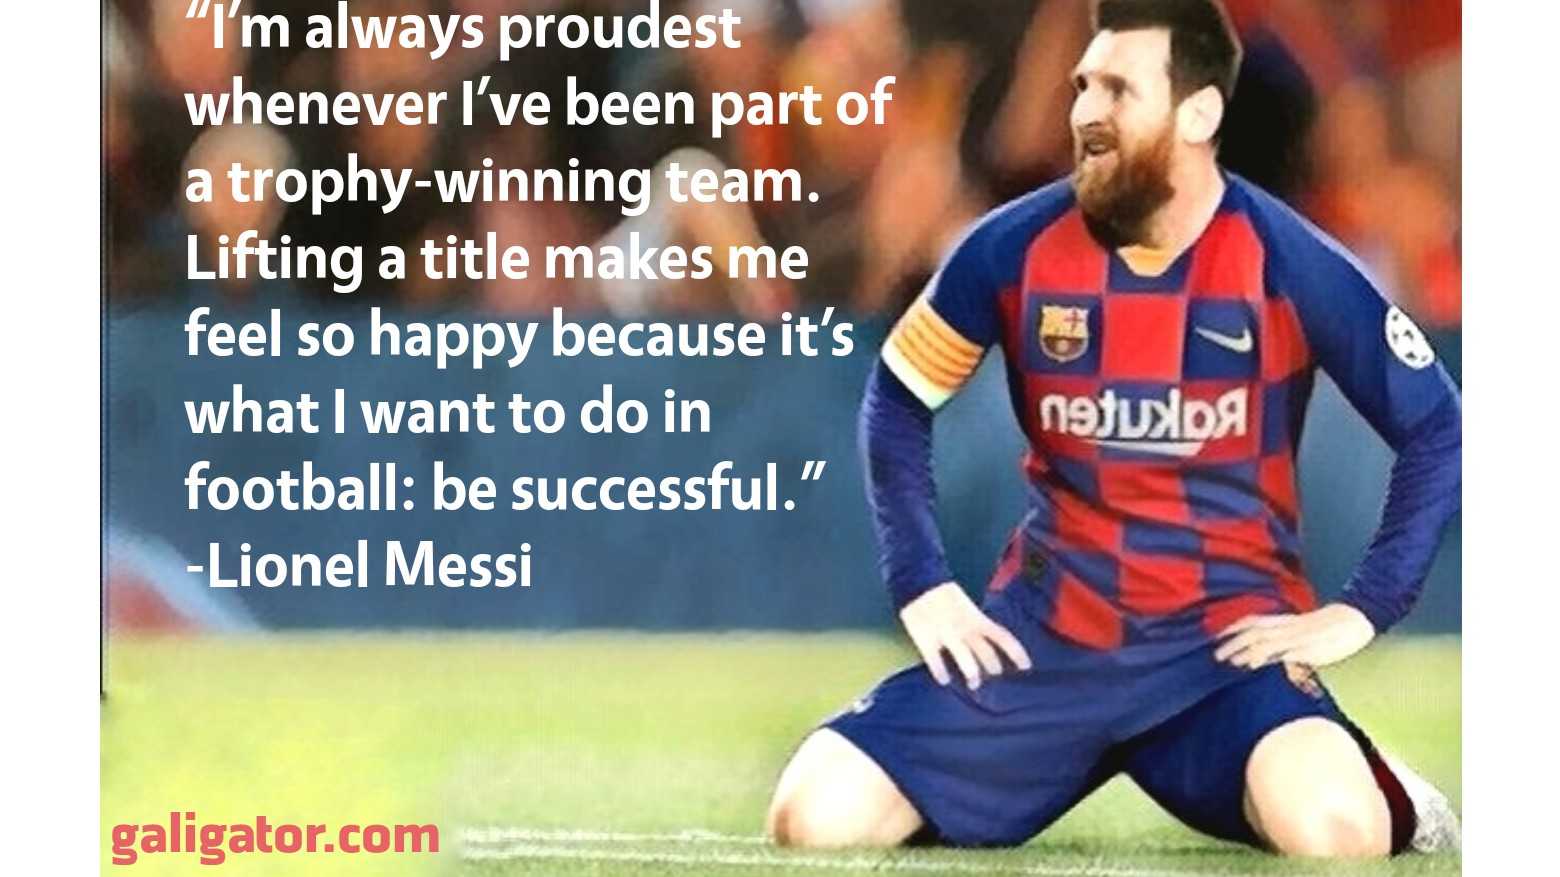 lionel messi quotes,leo messi quotes,messi inspirational quotes ,words about messi ,soccer quotes messi,lionel messi motivation ,what people say about messi,best quotes about lionel messi ,messi motivational quotes ,messi birthday quotes,fc barcelona quotes,barca quotes ,messi thoughts,messi captions  